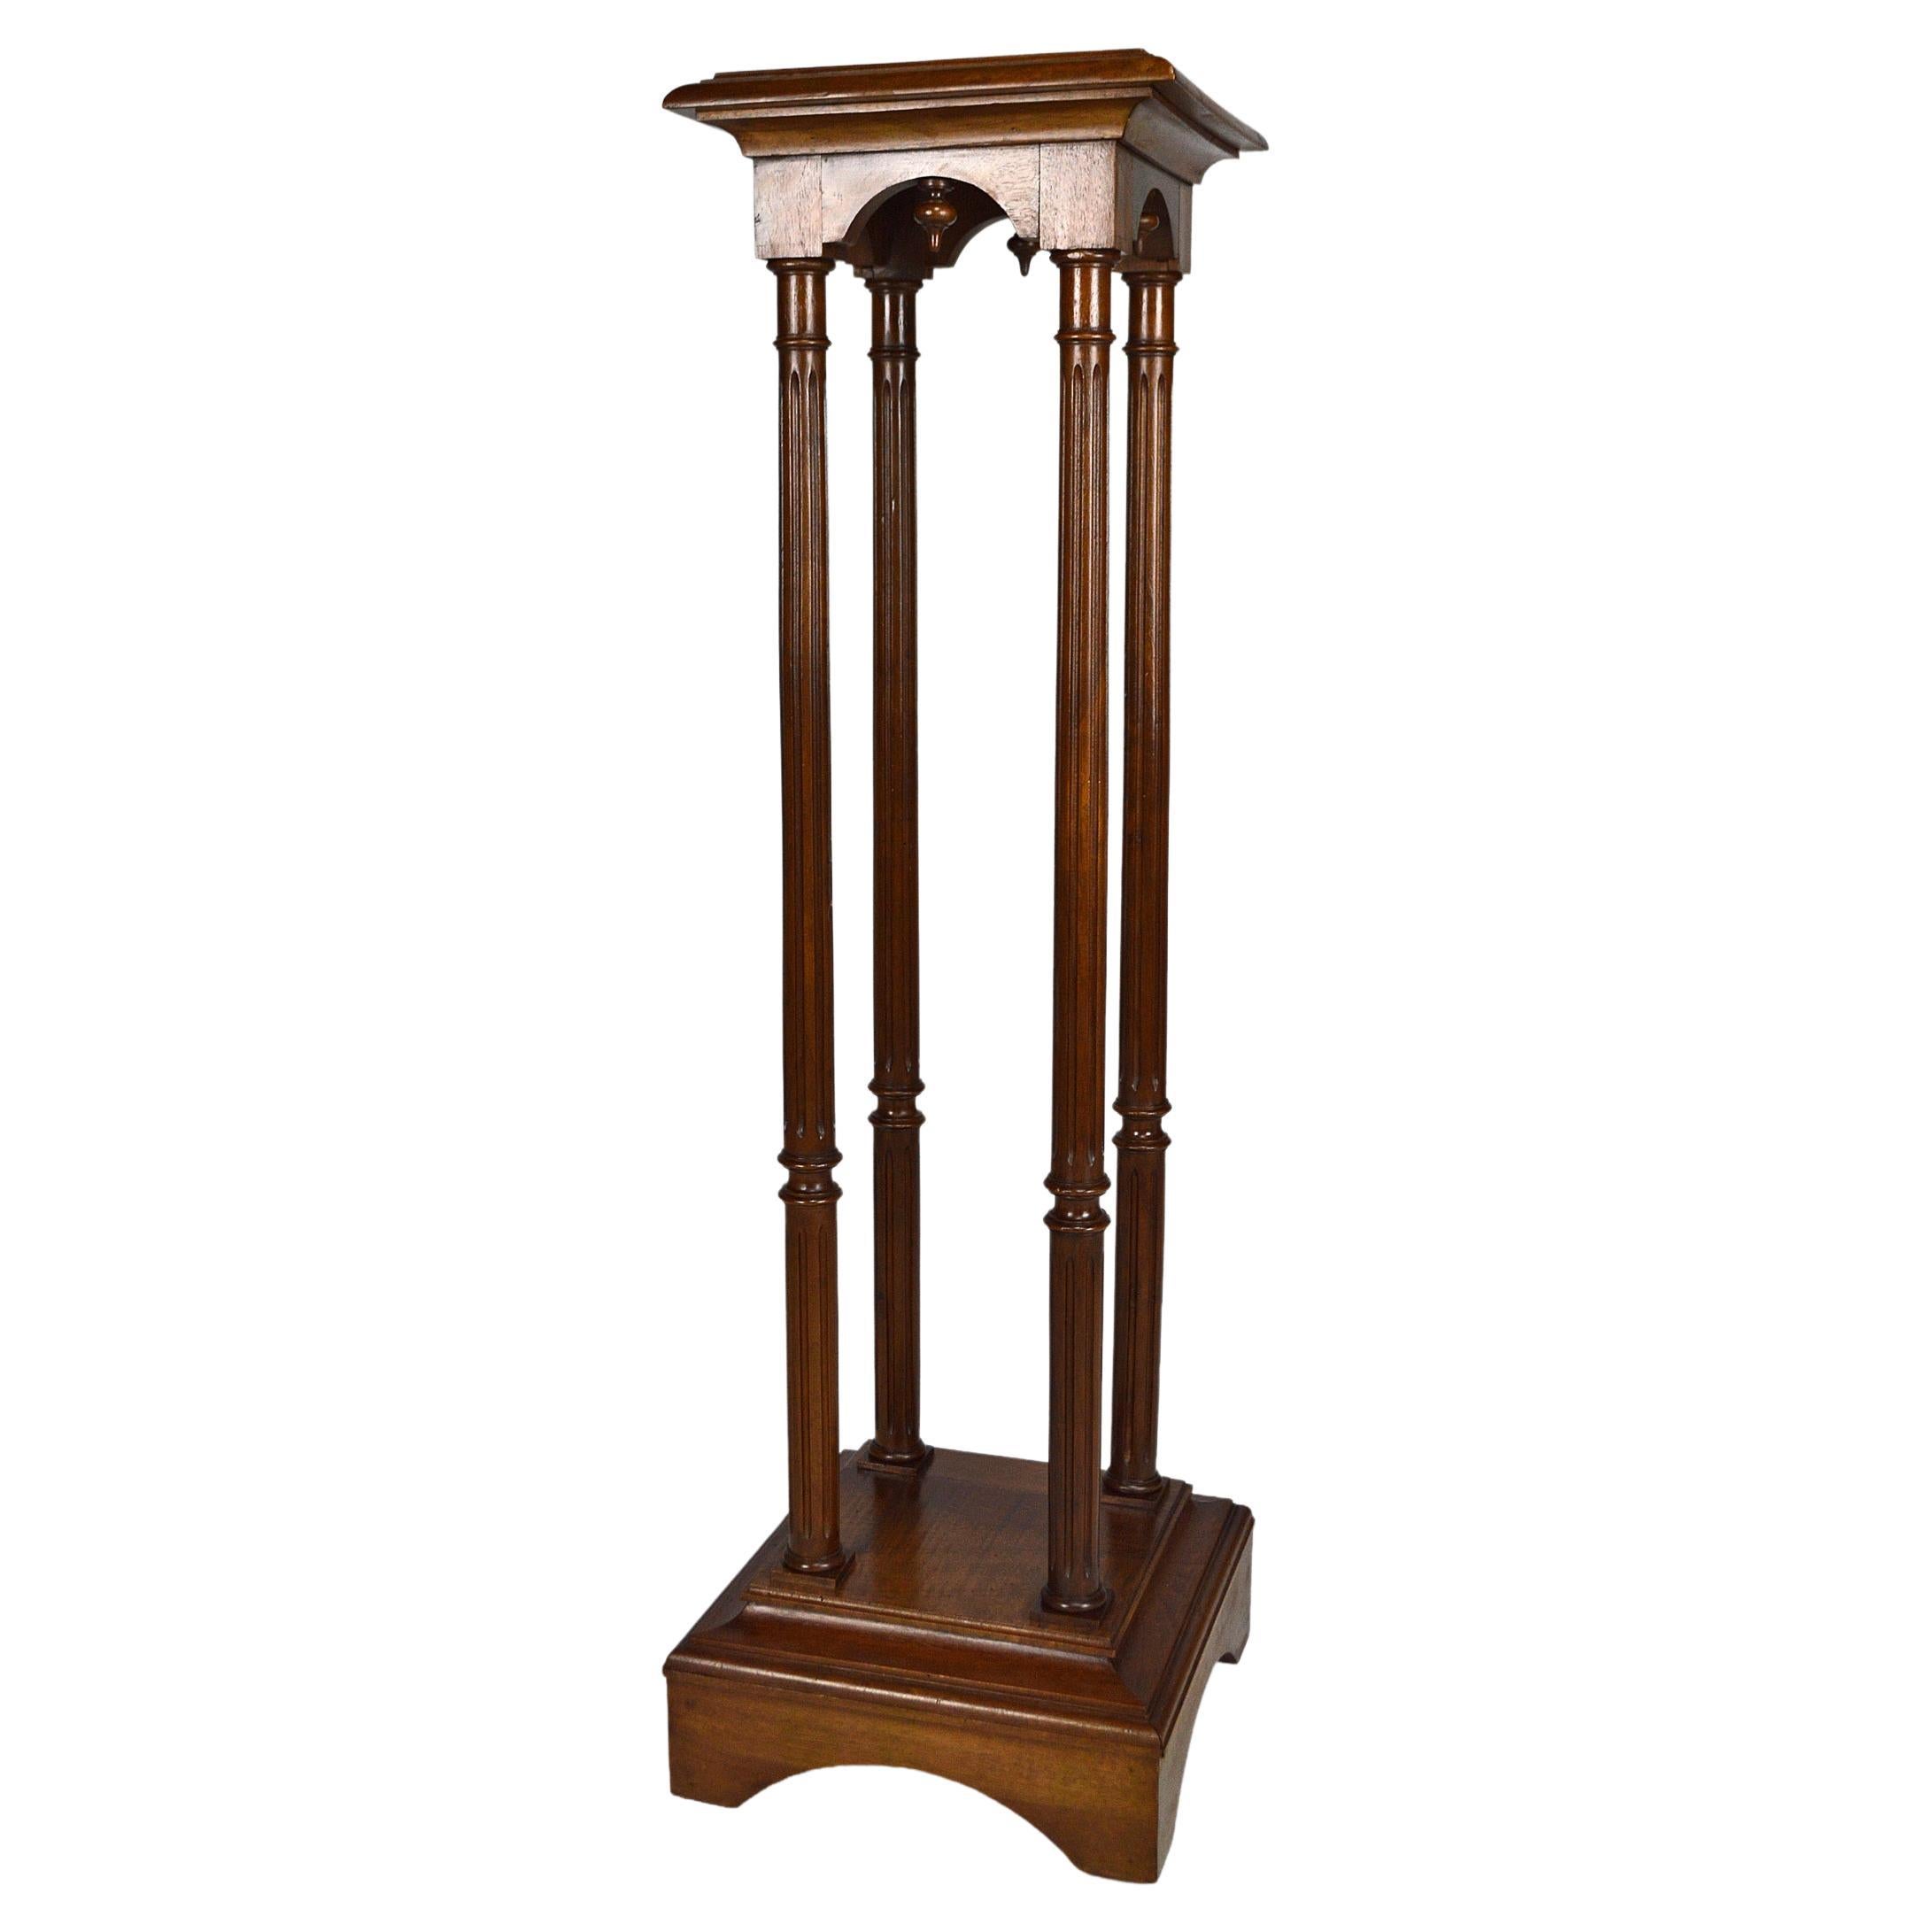 Gothic Revival Pedestal Stand in Walnut, France, circa 1880